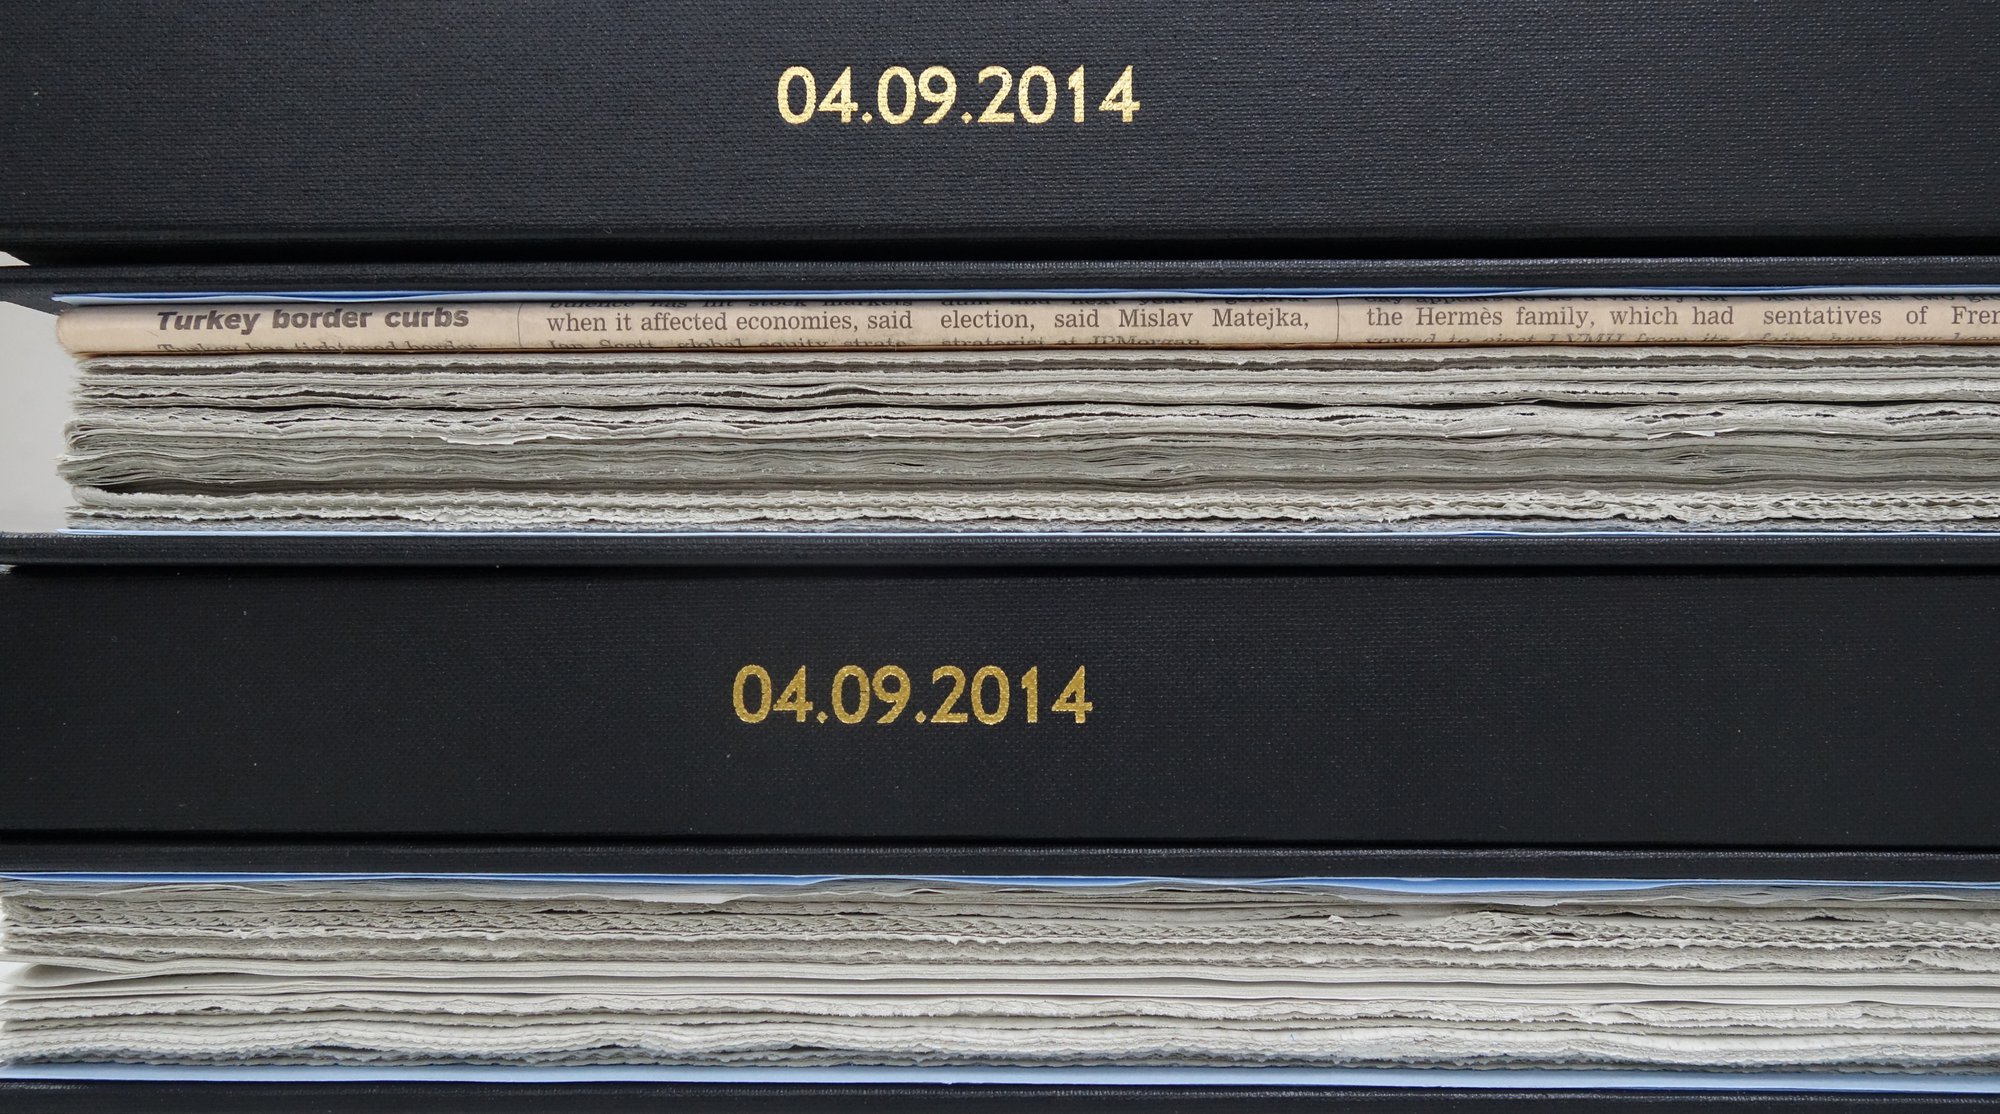 Banu Cennetoğlu, 04.09.2014, detail, 46 volumes of newspapers printed in the UK on 04.09.2014, hardcover bound, 2014